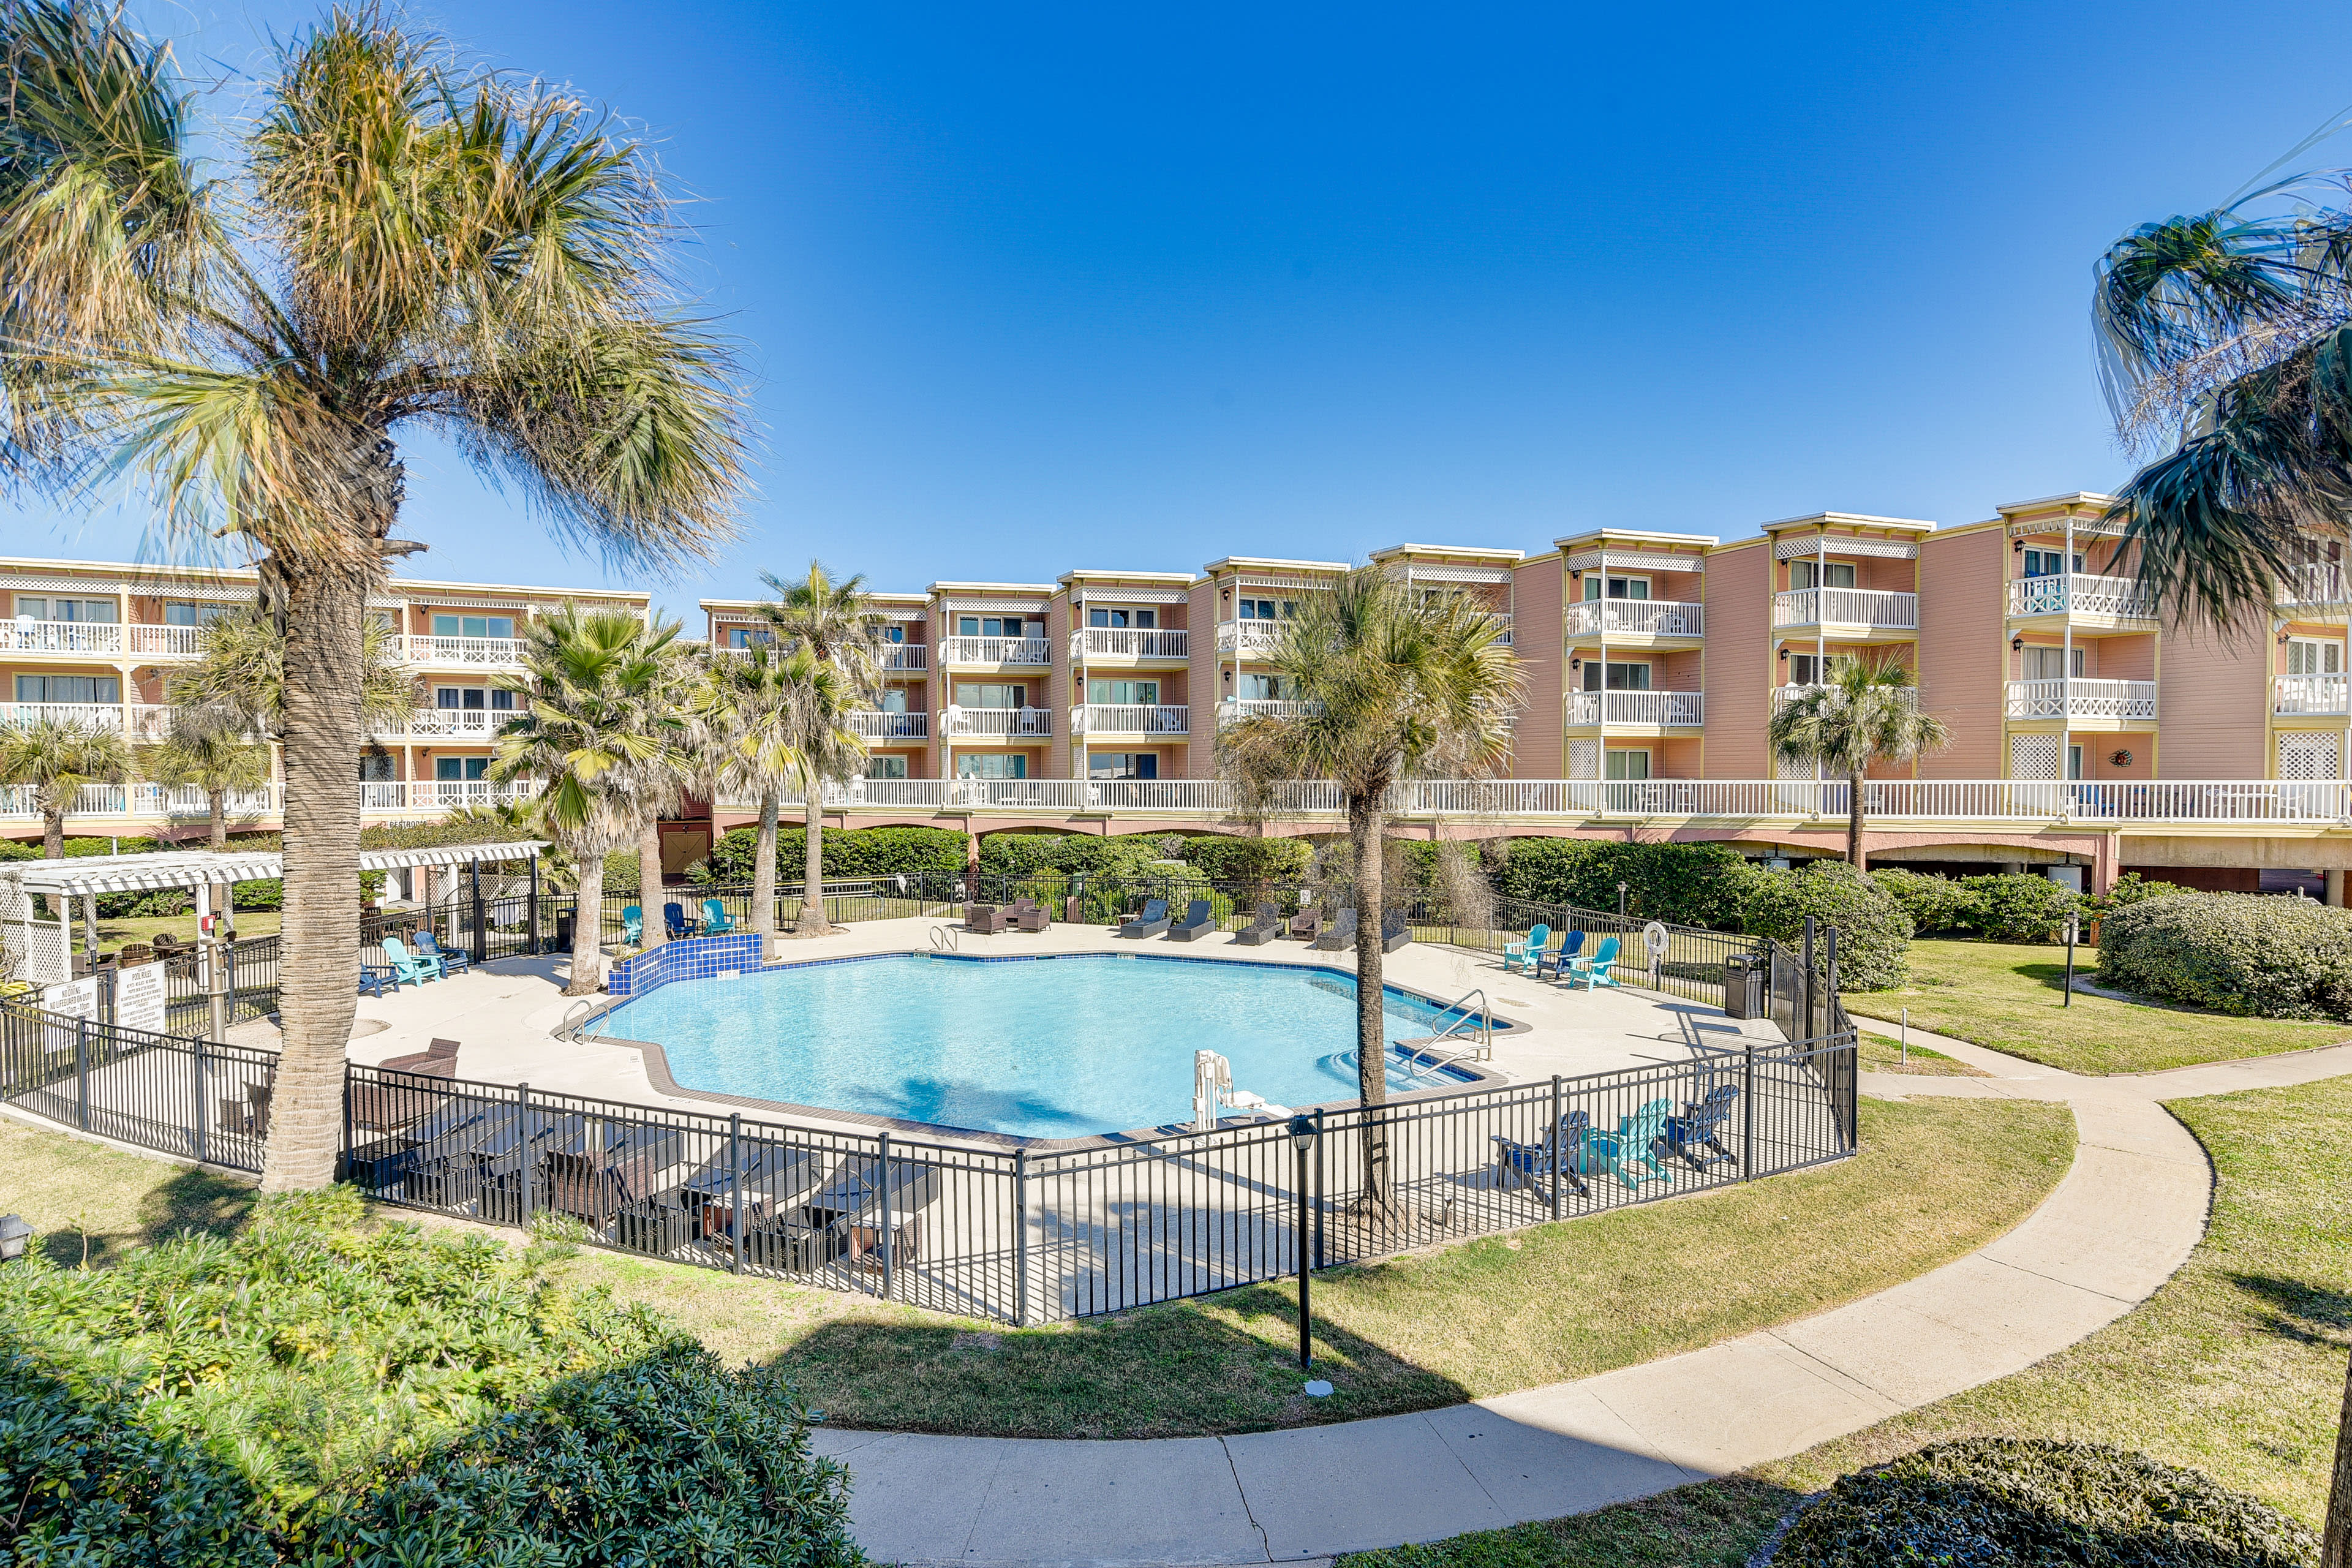 Community Amenities | Outdoor Pool | Fitness Center | Laundry Room